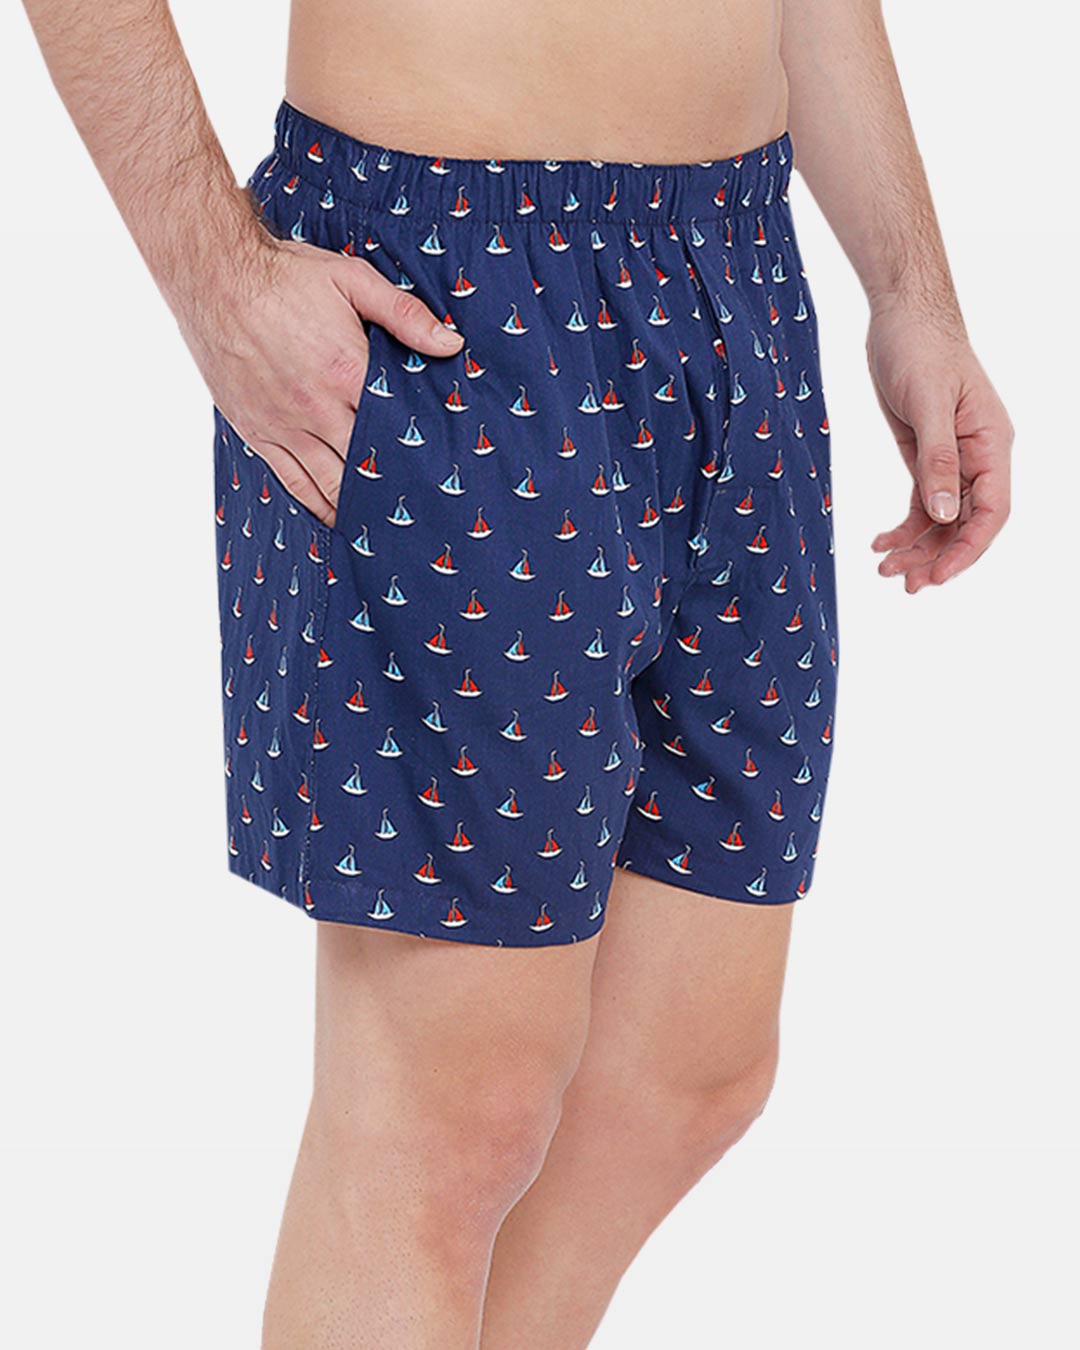 Shop Super Combed Cotton Printed Boxers For Men (Pack Of 1) Shell Boat-Back